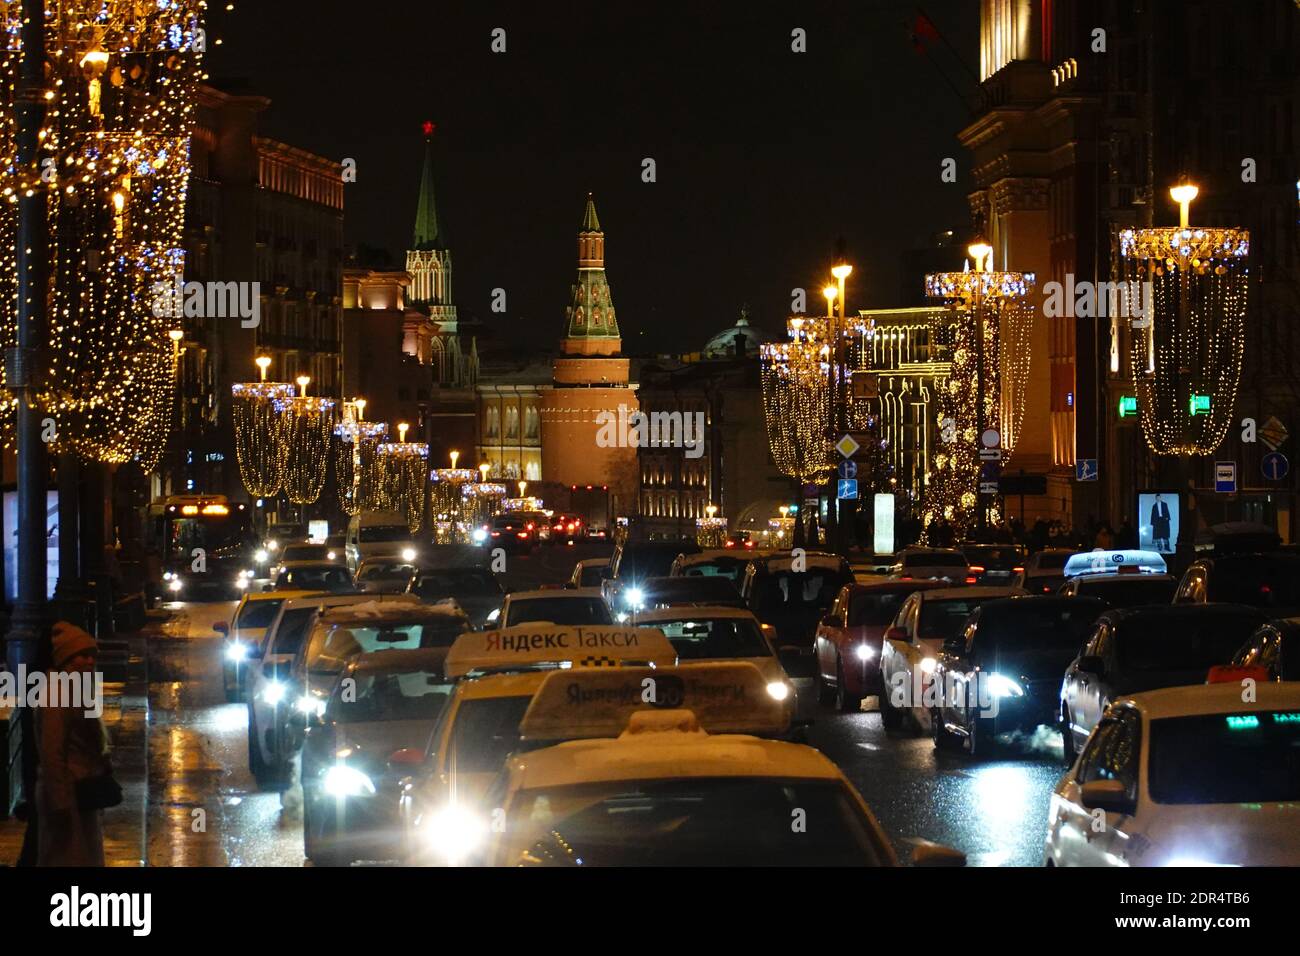 Moscow new year 2021 (christmas) decoration. Stock Photo